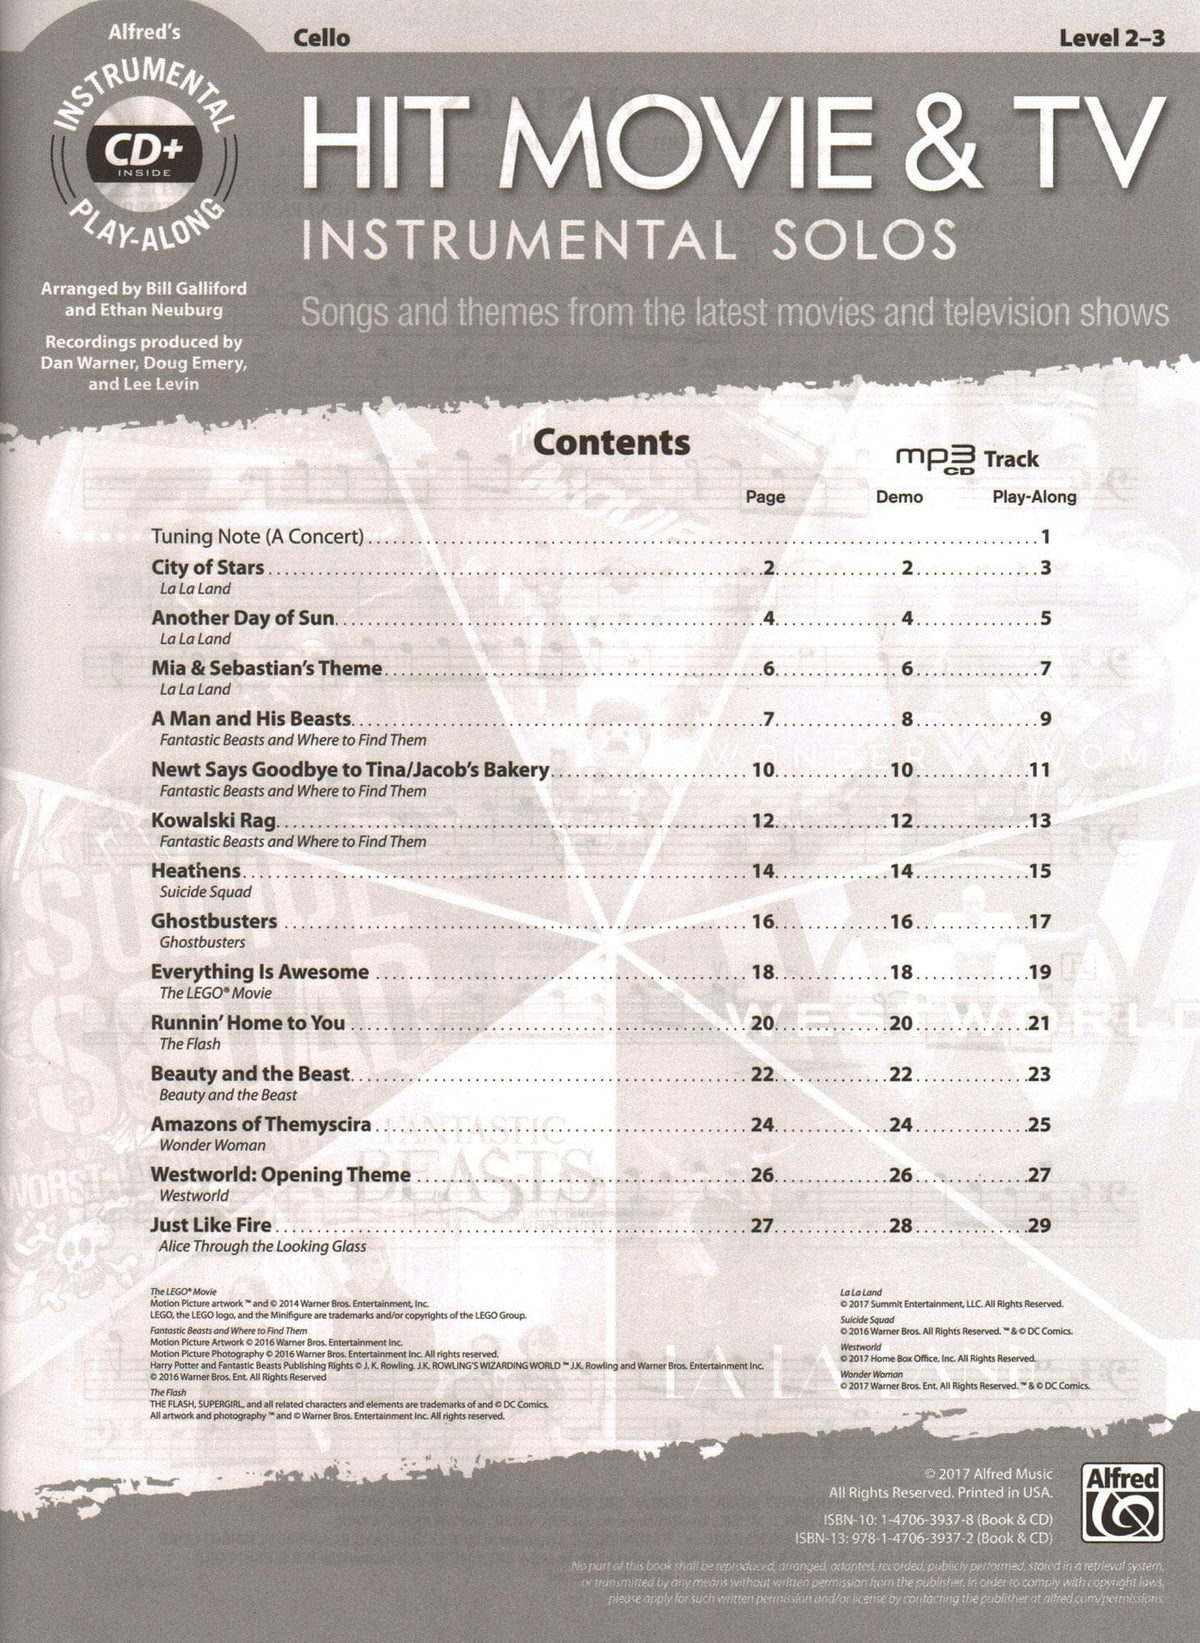 Hit Movie & TV Instrumental Solos - for Cello with CD Audio or Piano PDF Accompaniment - Alfred